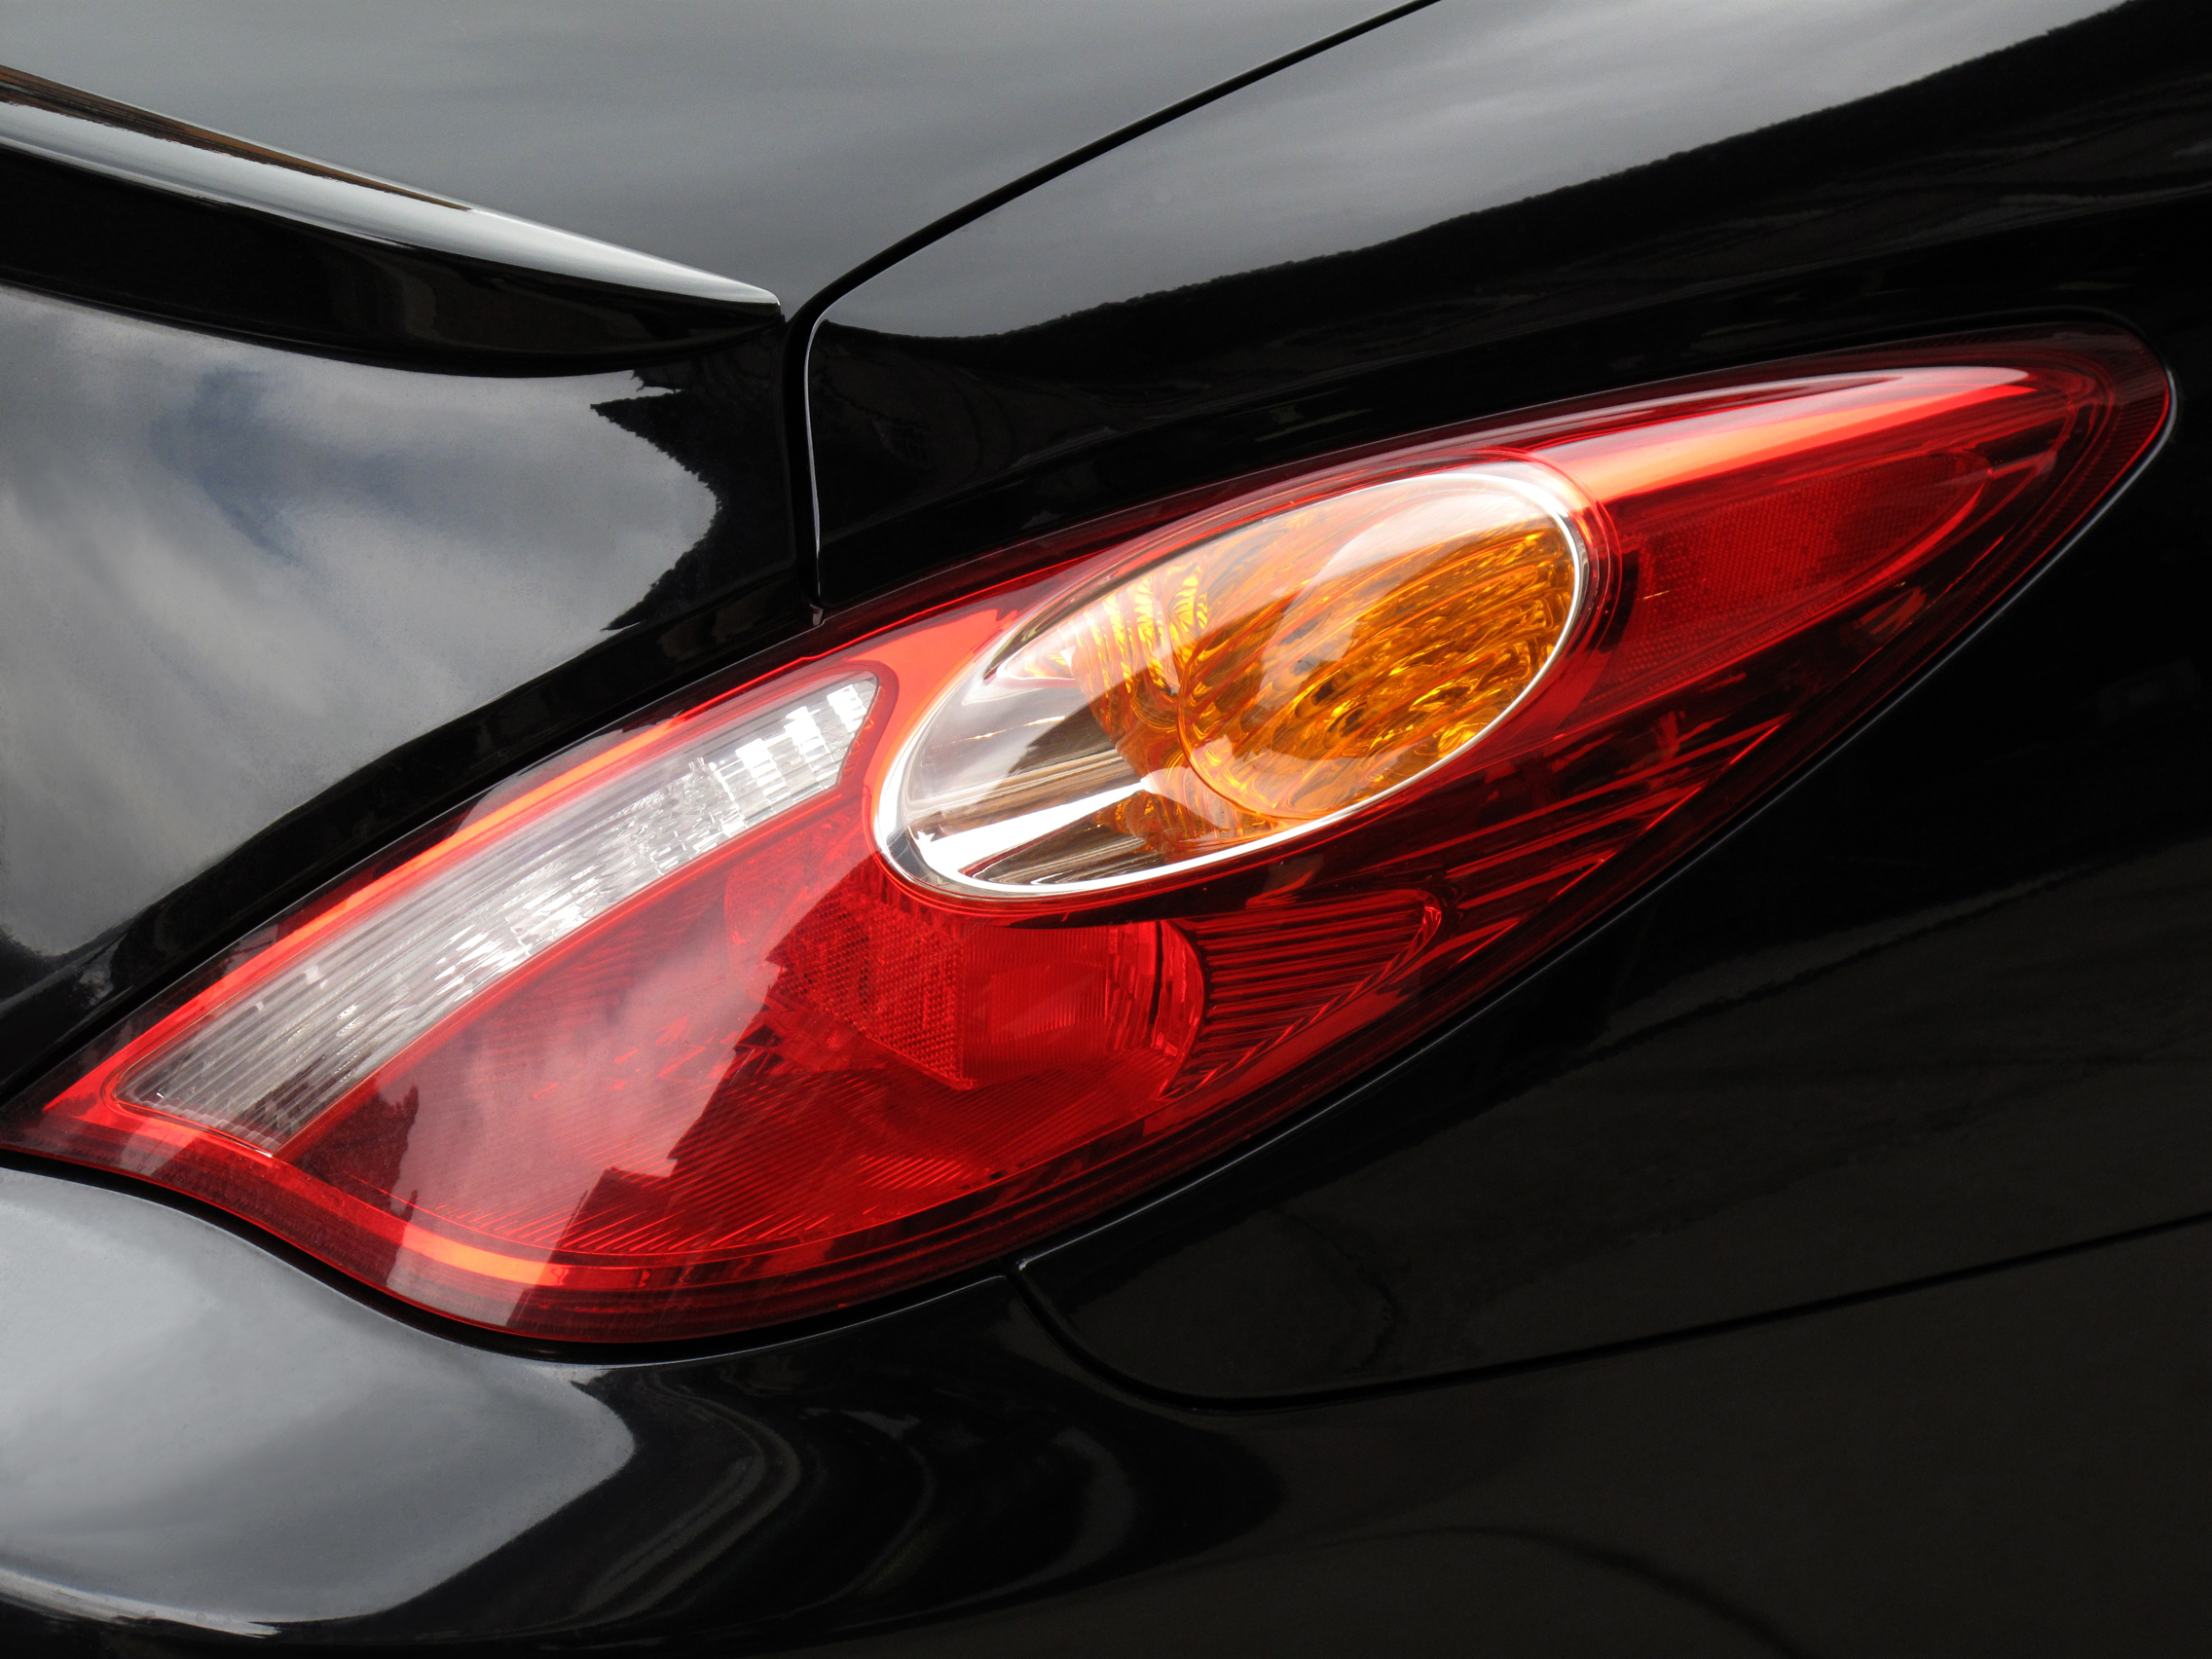 Tail Light, FREE Stock Photo, Image, Picture: Sports Car Tail Light